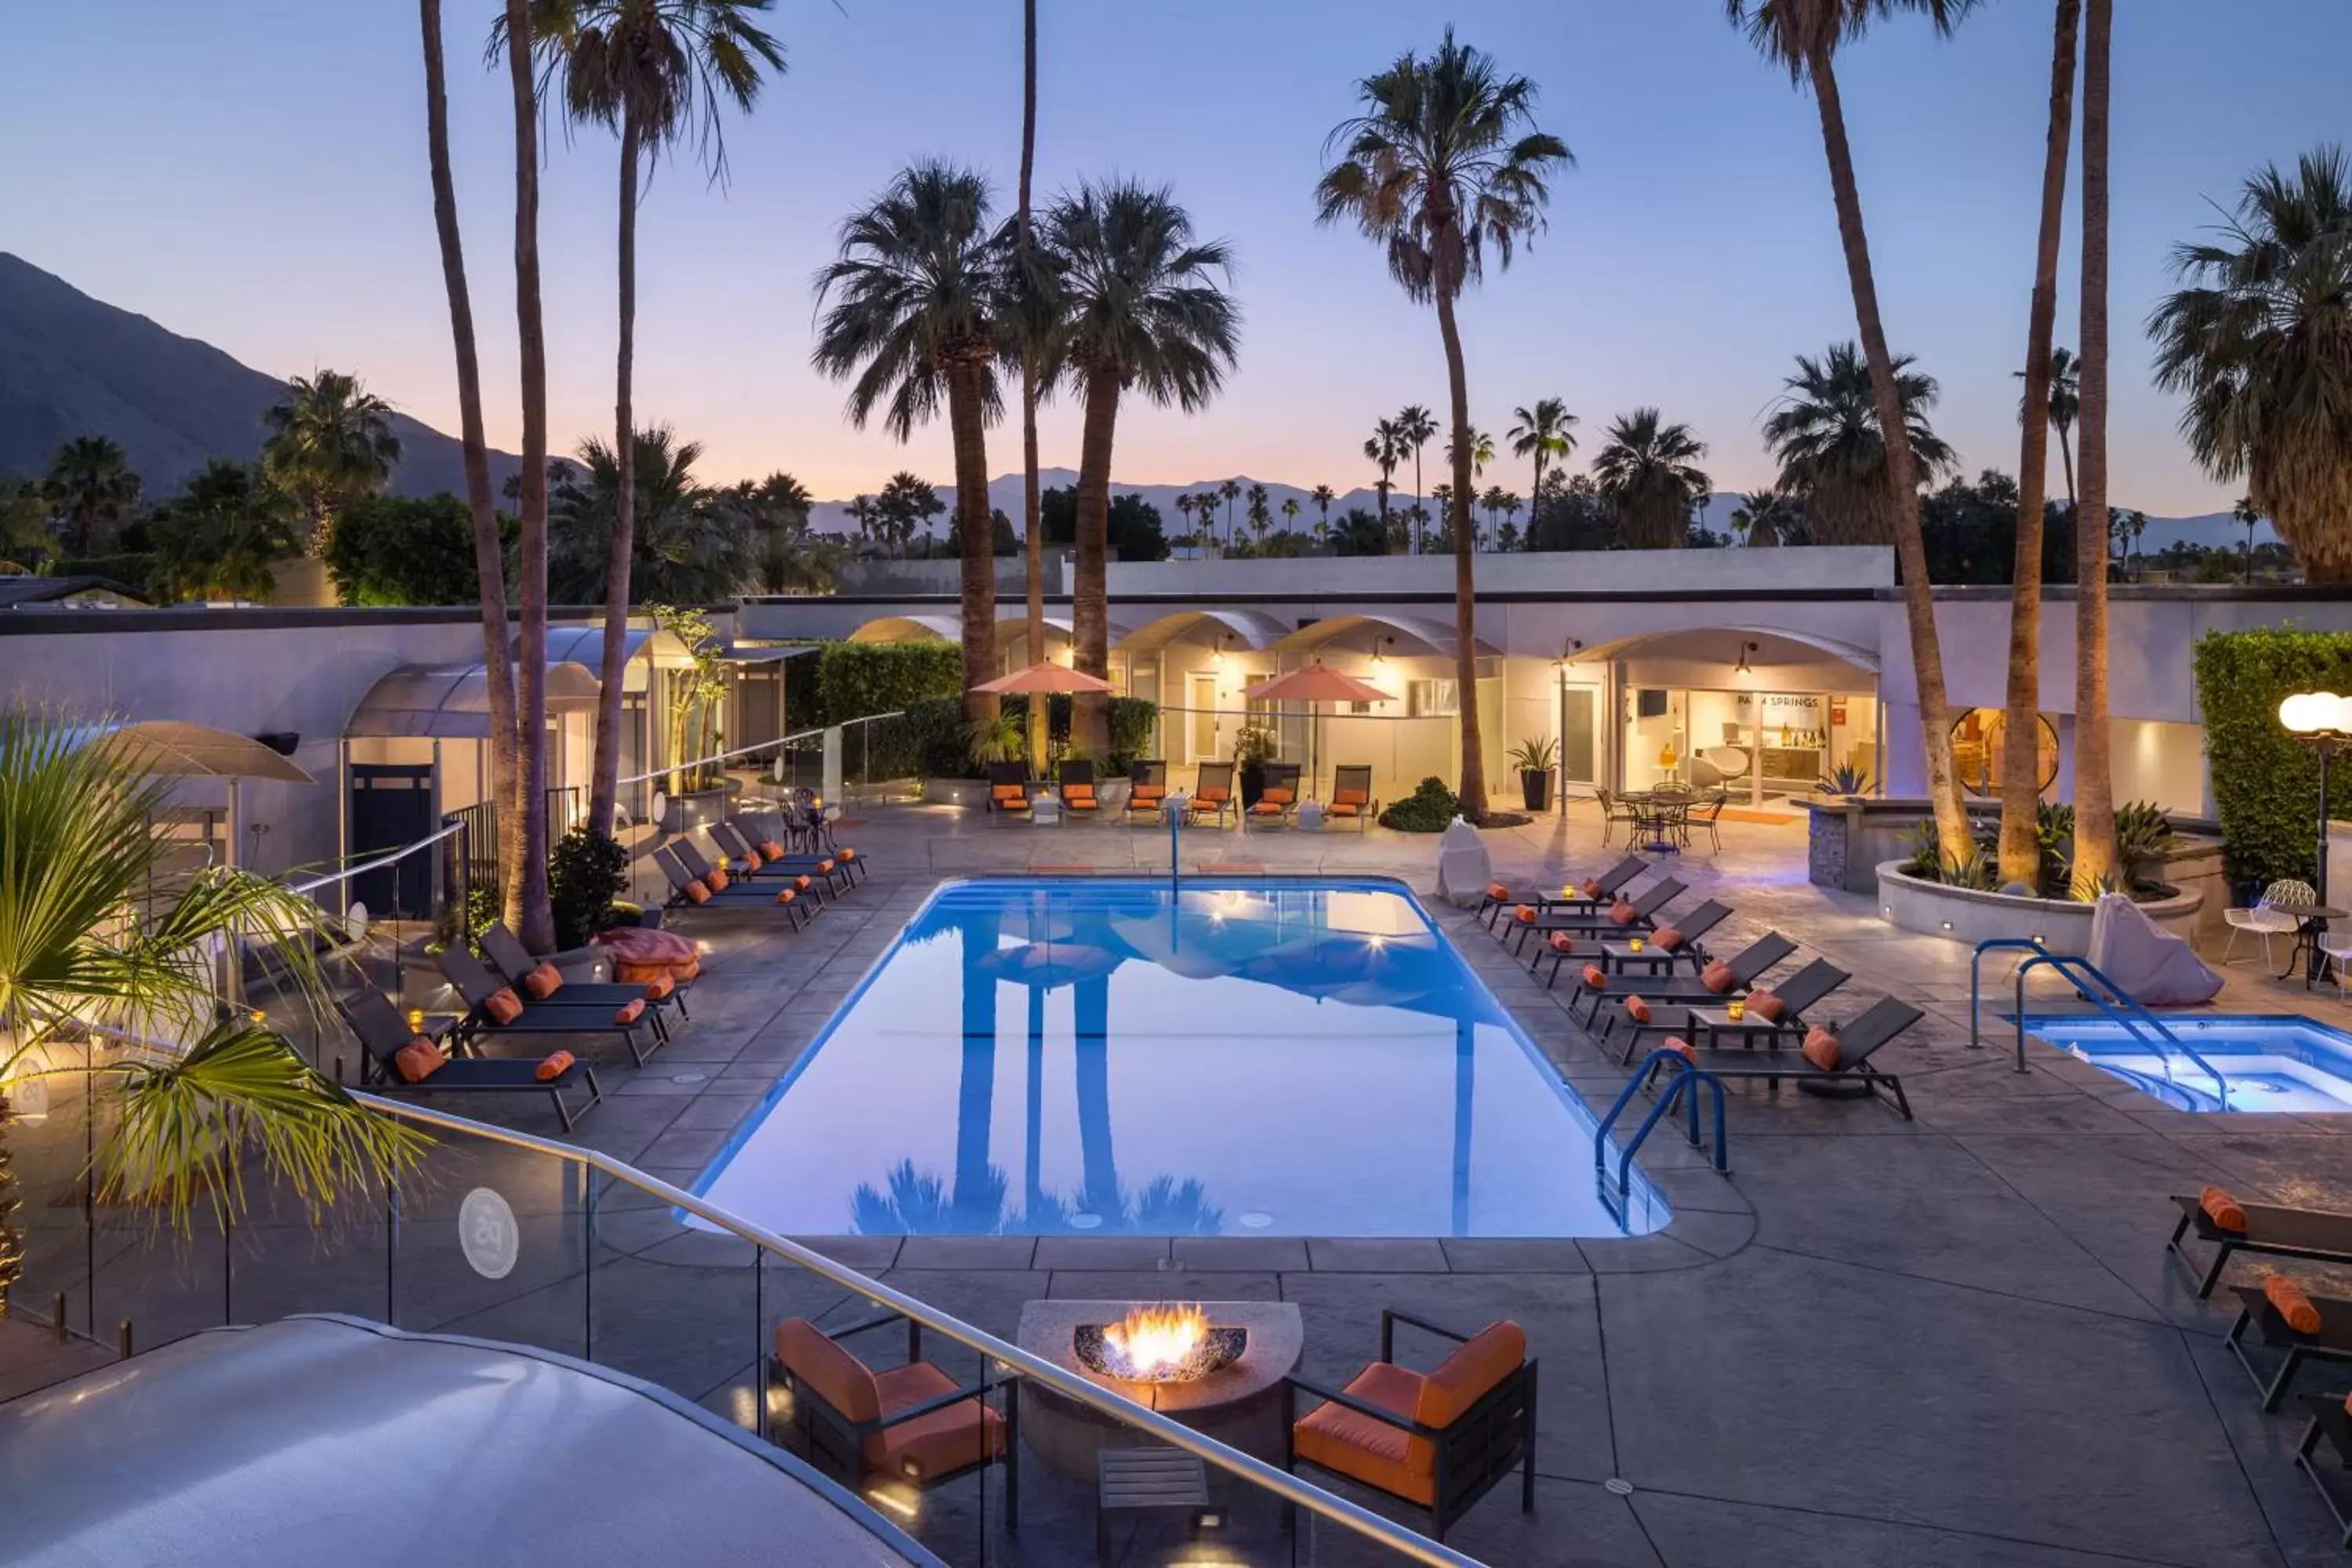 Property building, Swimming Pool in The Palm Springs Hotel